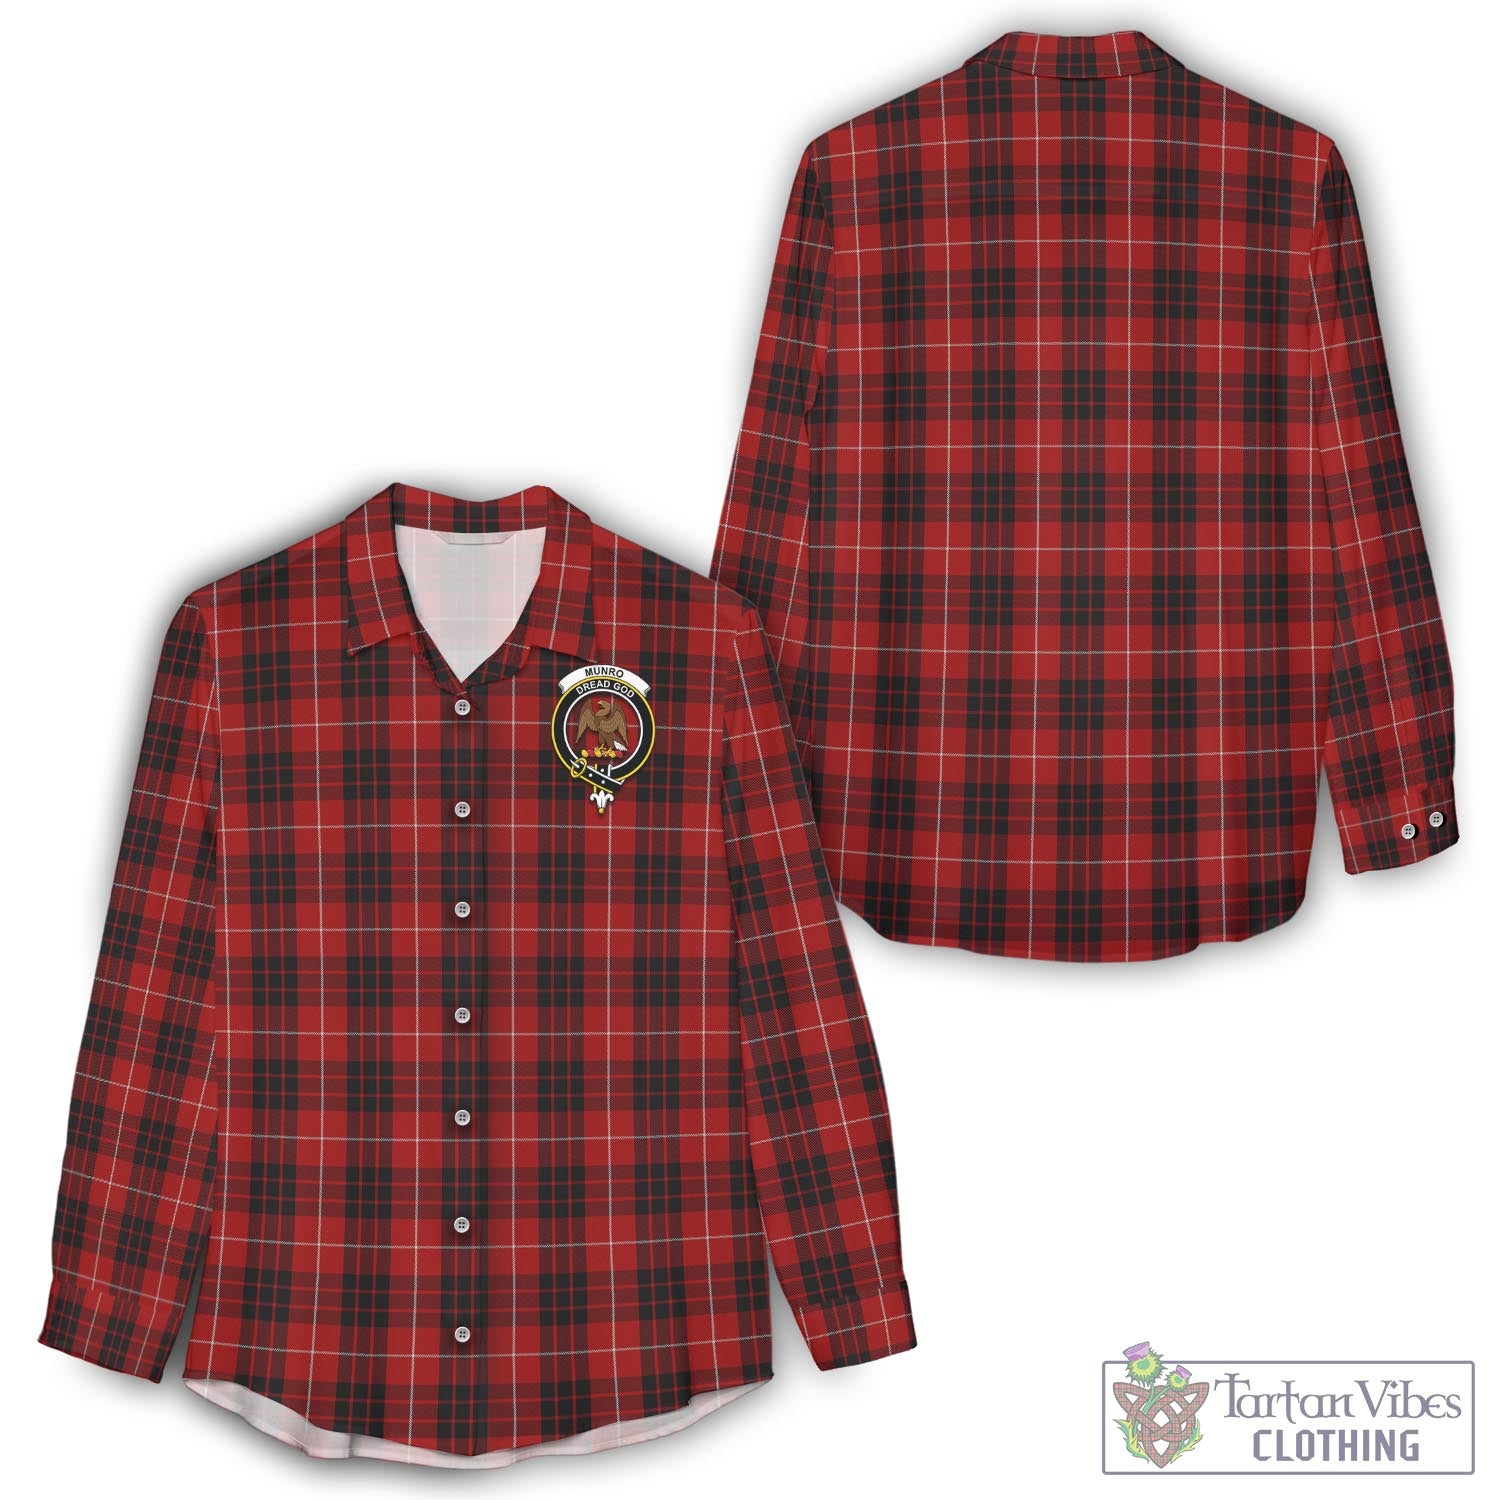 Tartan Vibes Clothing Munro Black and Red Tartan Womens Casual Shirt with Family Crest